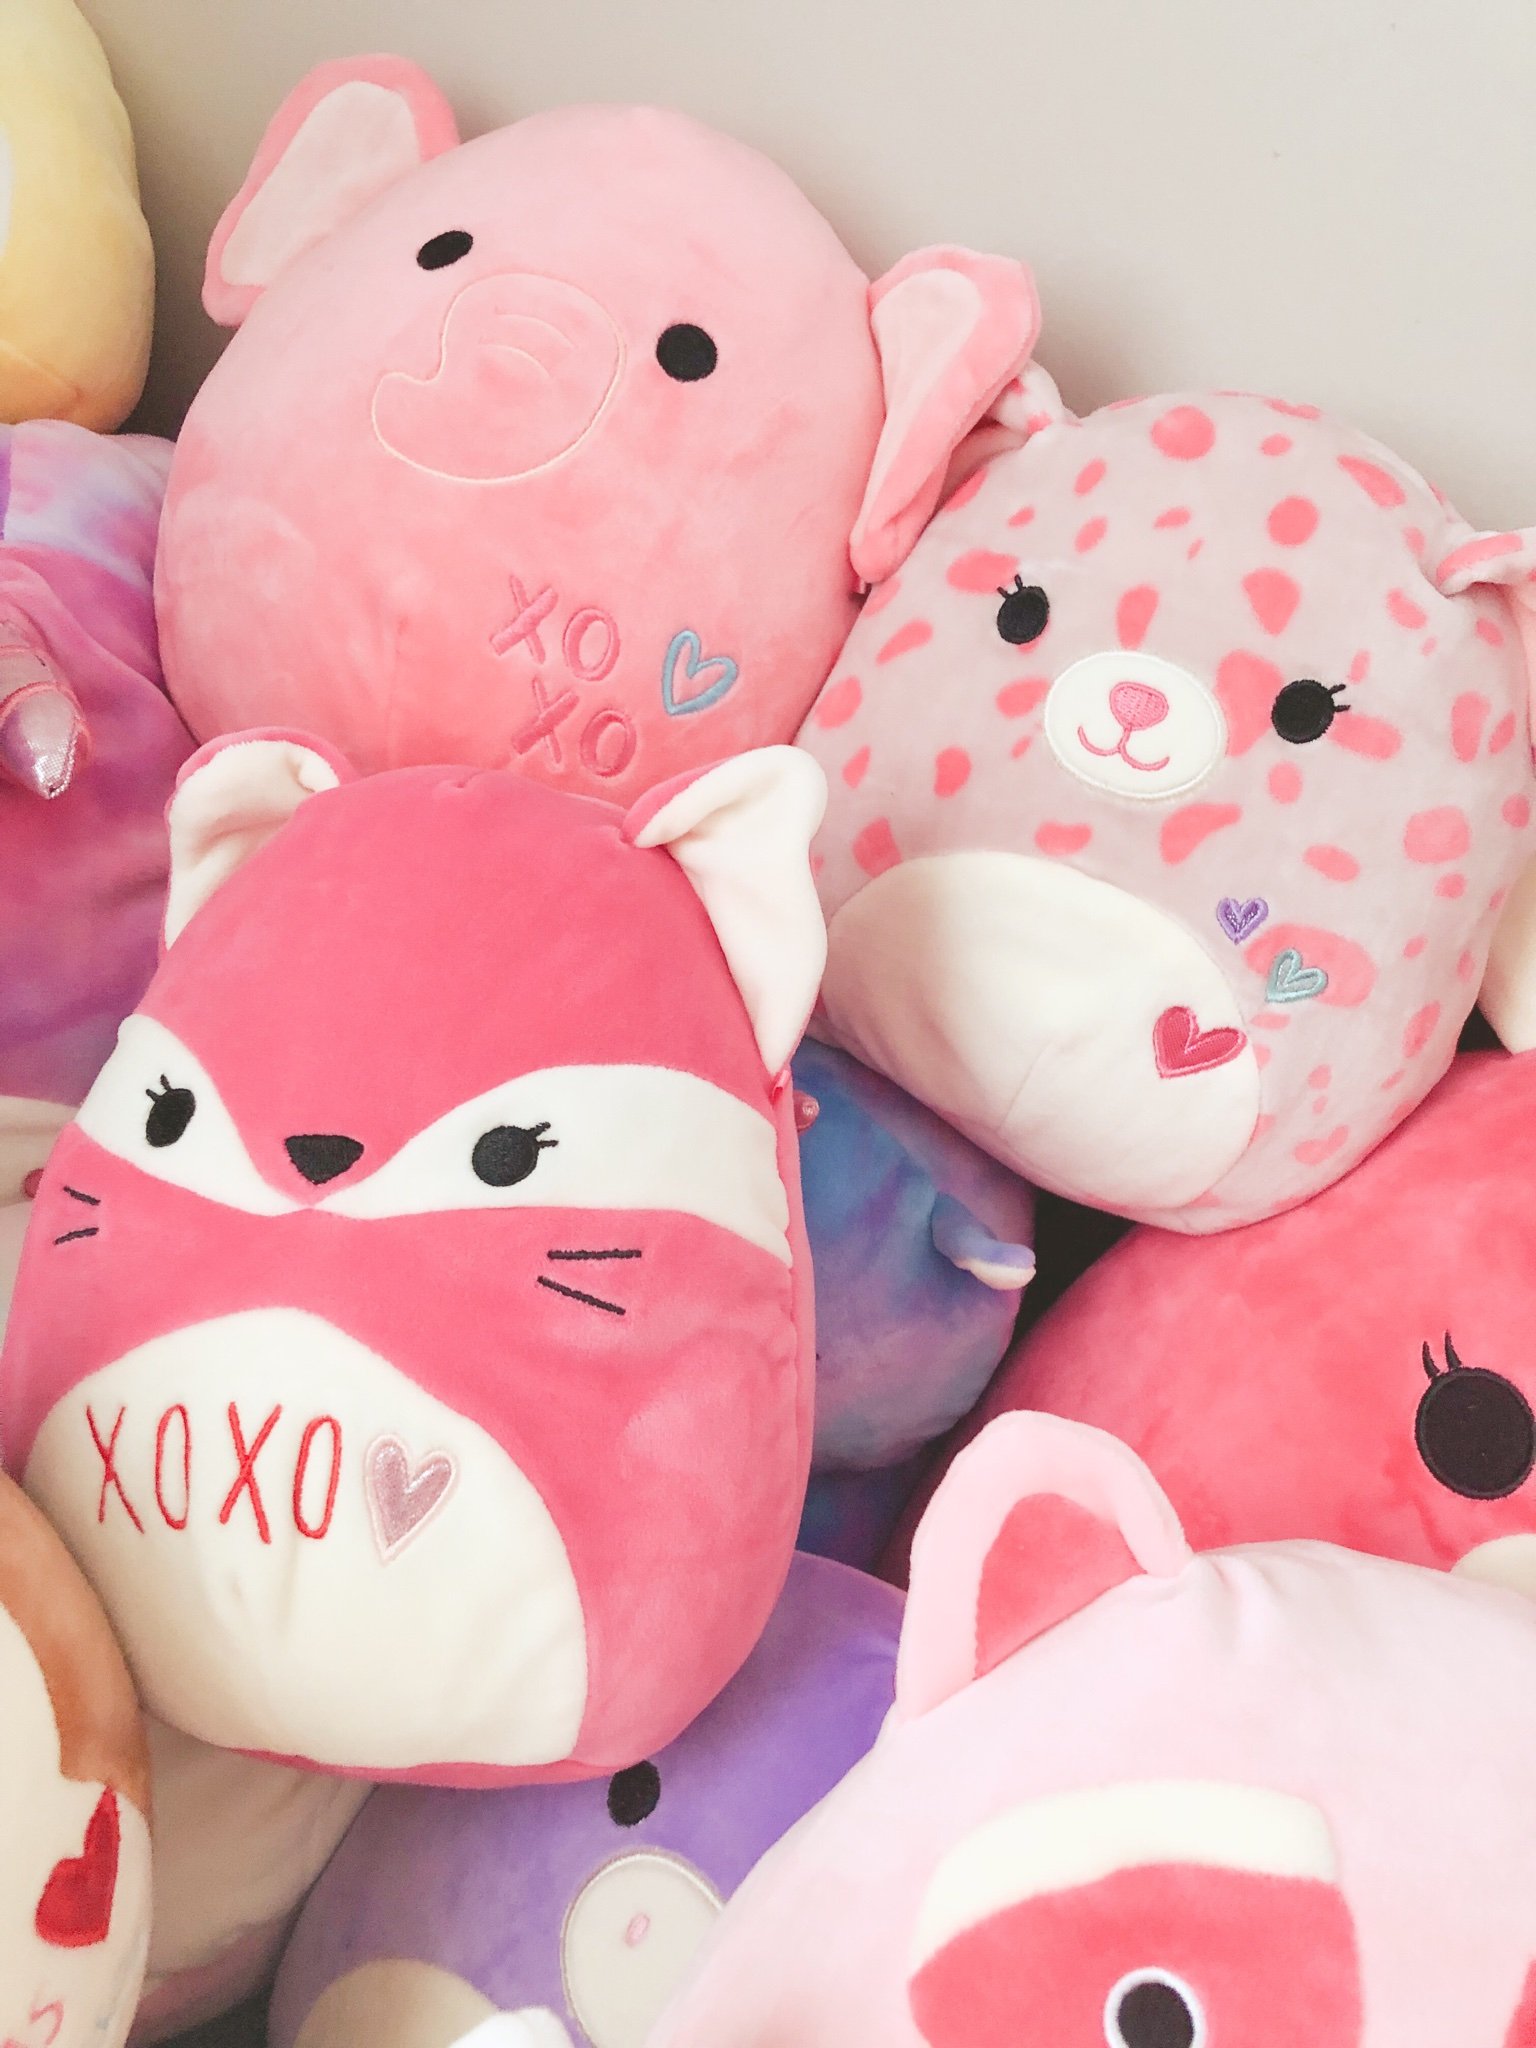 Hello! We collect squishmallows, and our account represents that. ^^ 
So far in our collection we own 66, and hhoe to collect more!
Find us on Instagram ^^